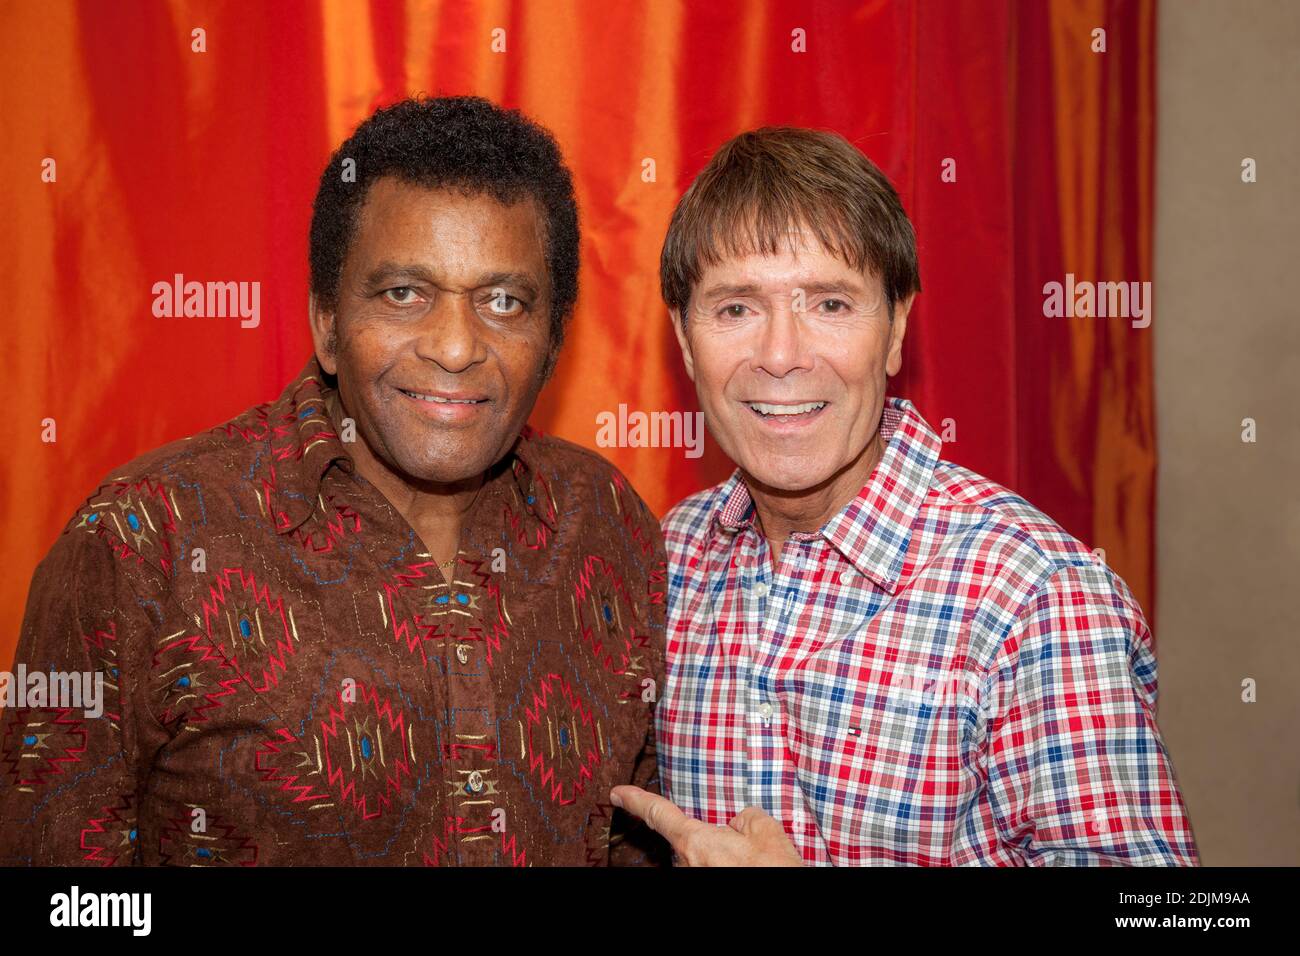 Two music legends - the late Charley Pride with Sir Cliff Richard back stage at the Grand Ole Opry - Apr 2013, Nashville, Tennessee, USA Stock Photo